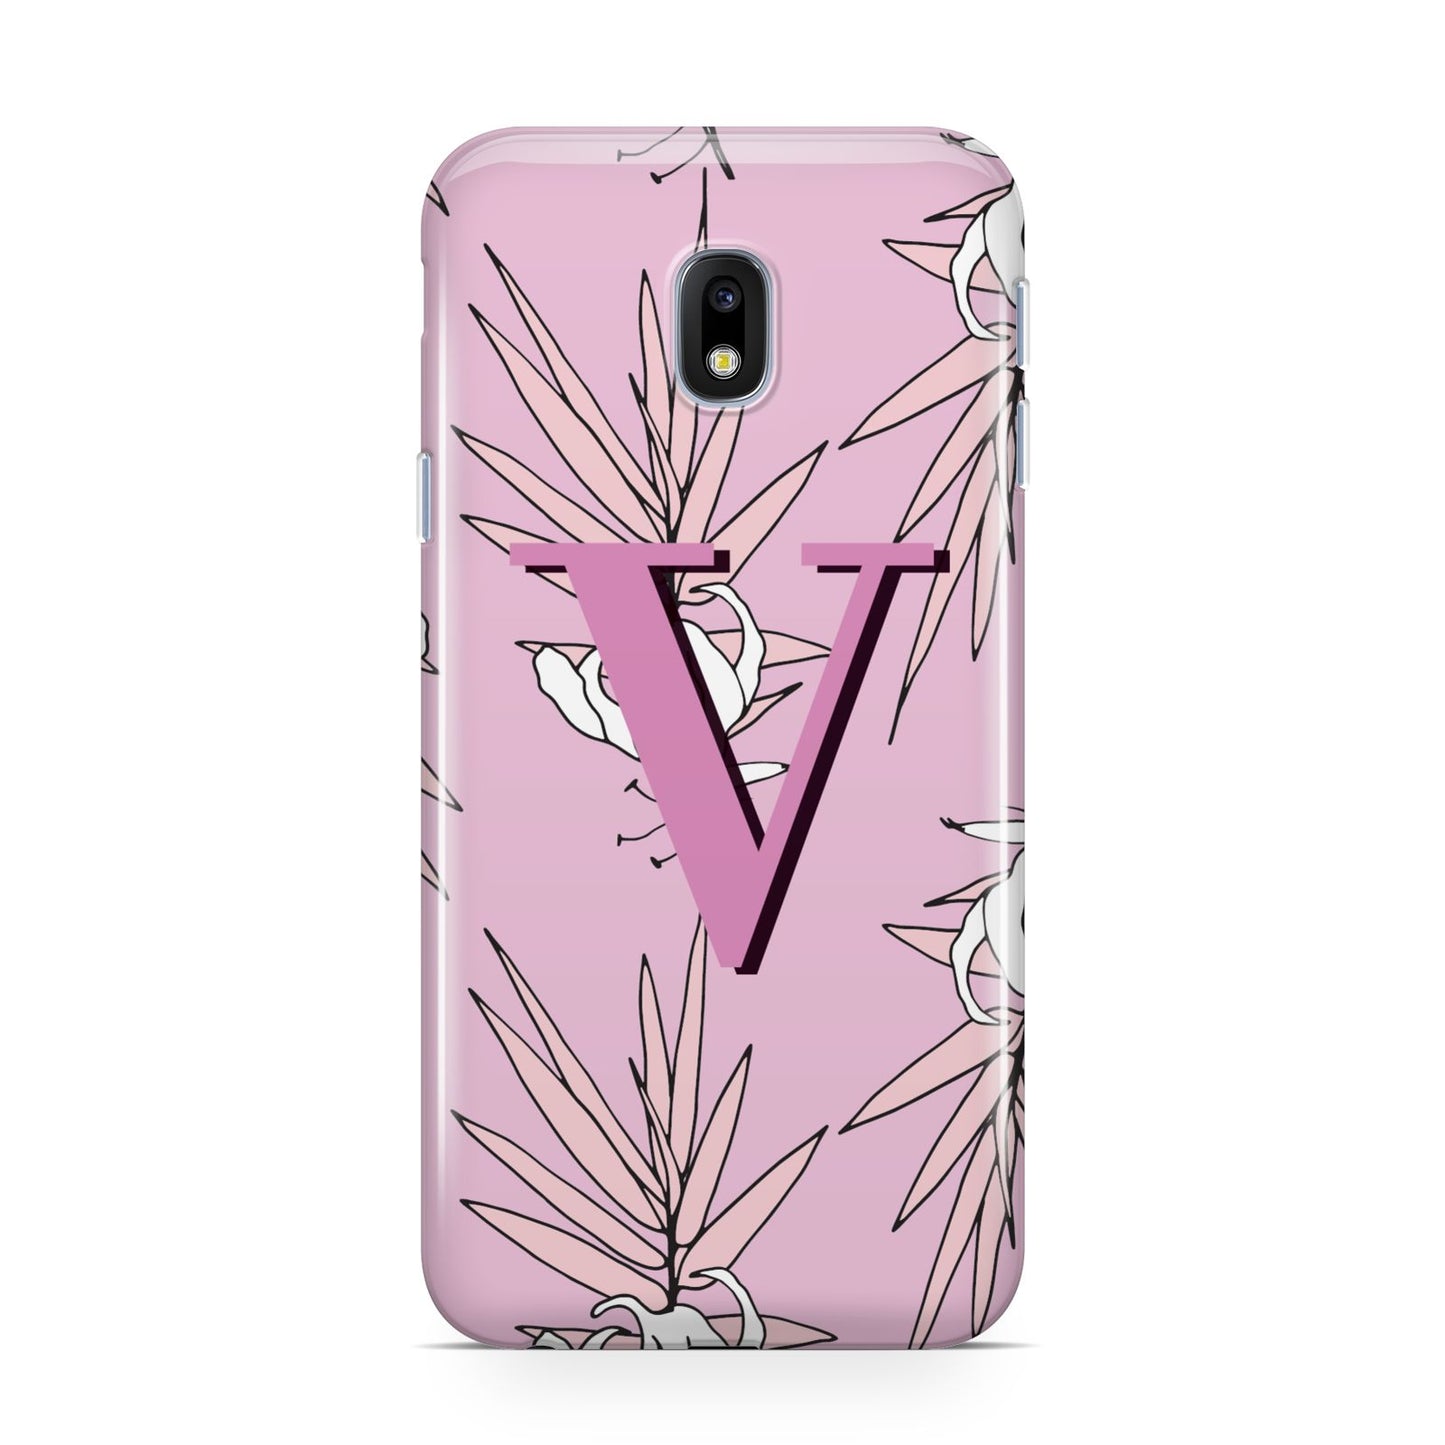 Personalised Pink and White Floral Monogram Samsung Galaxy J3 2017 Case